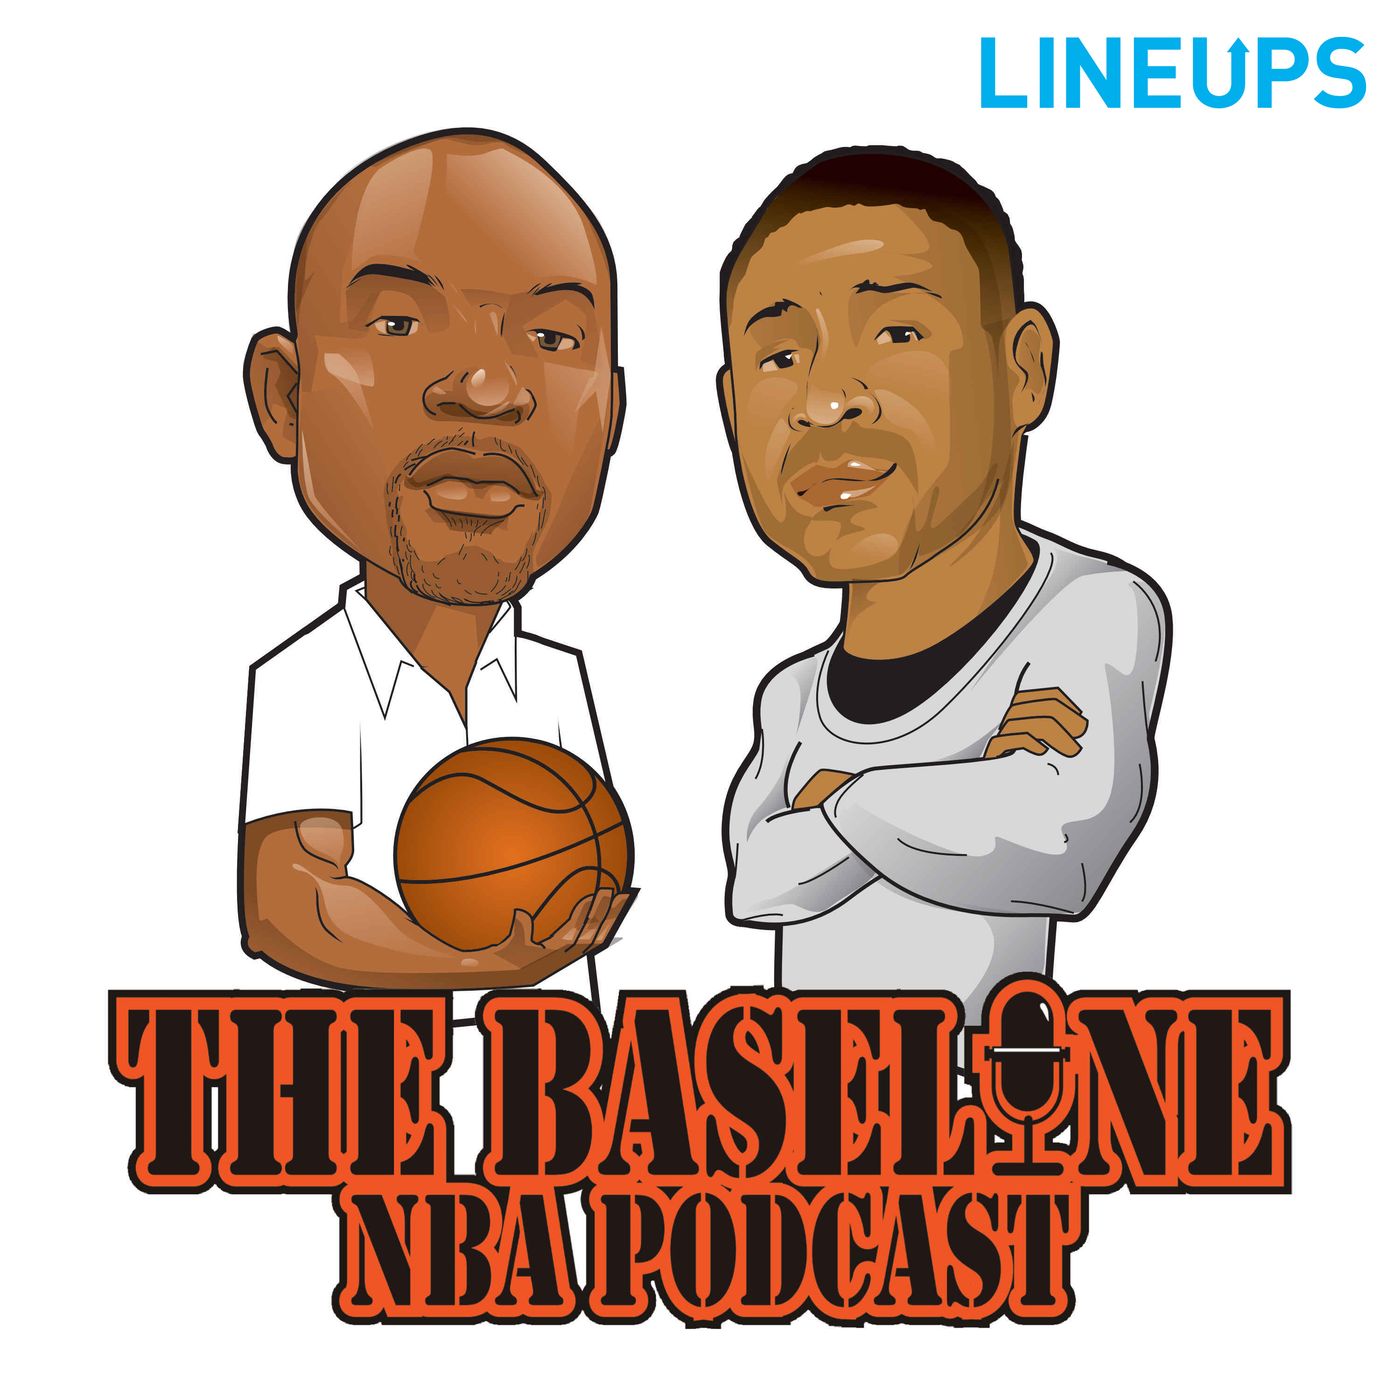 2020-21 Eastern Conference Preview | Episode 478